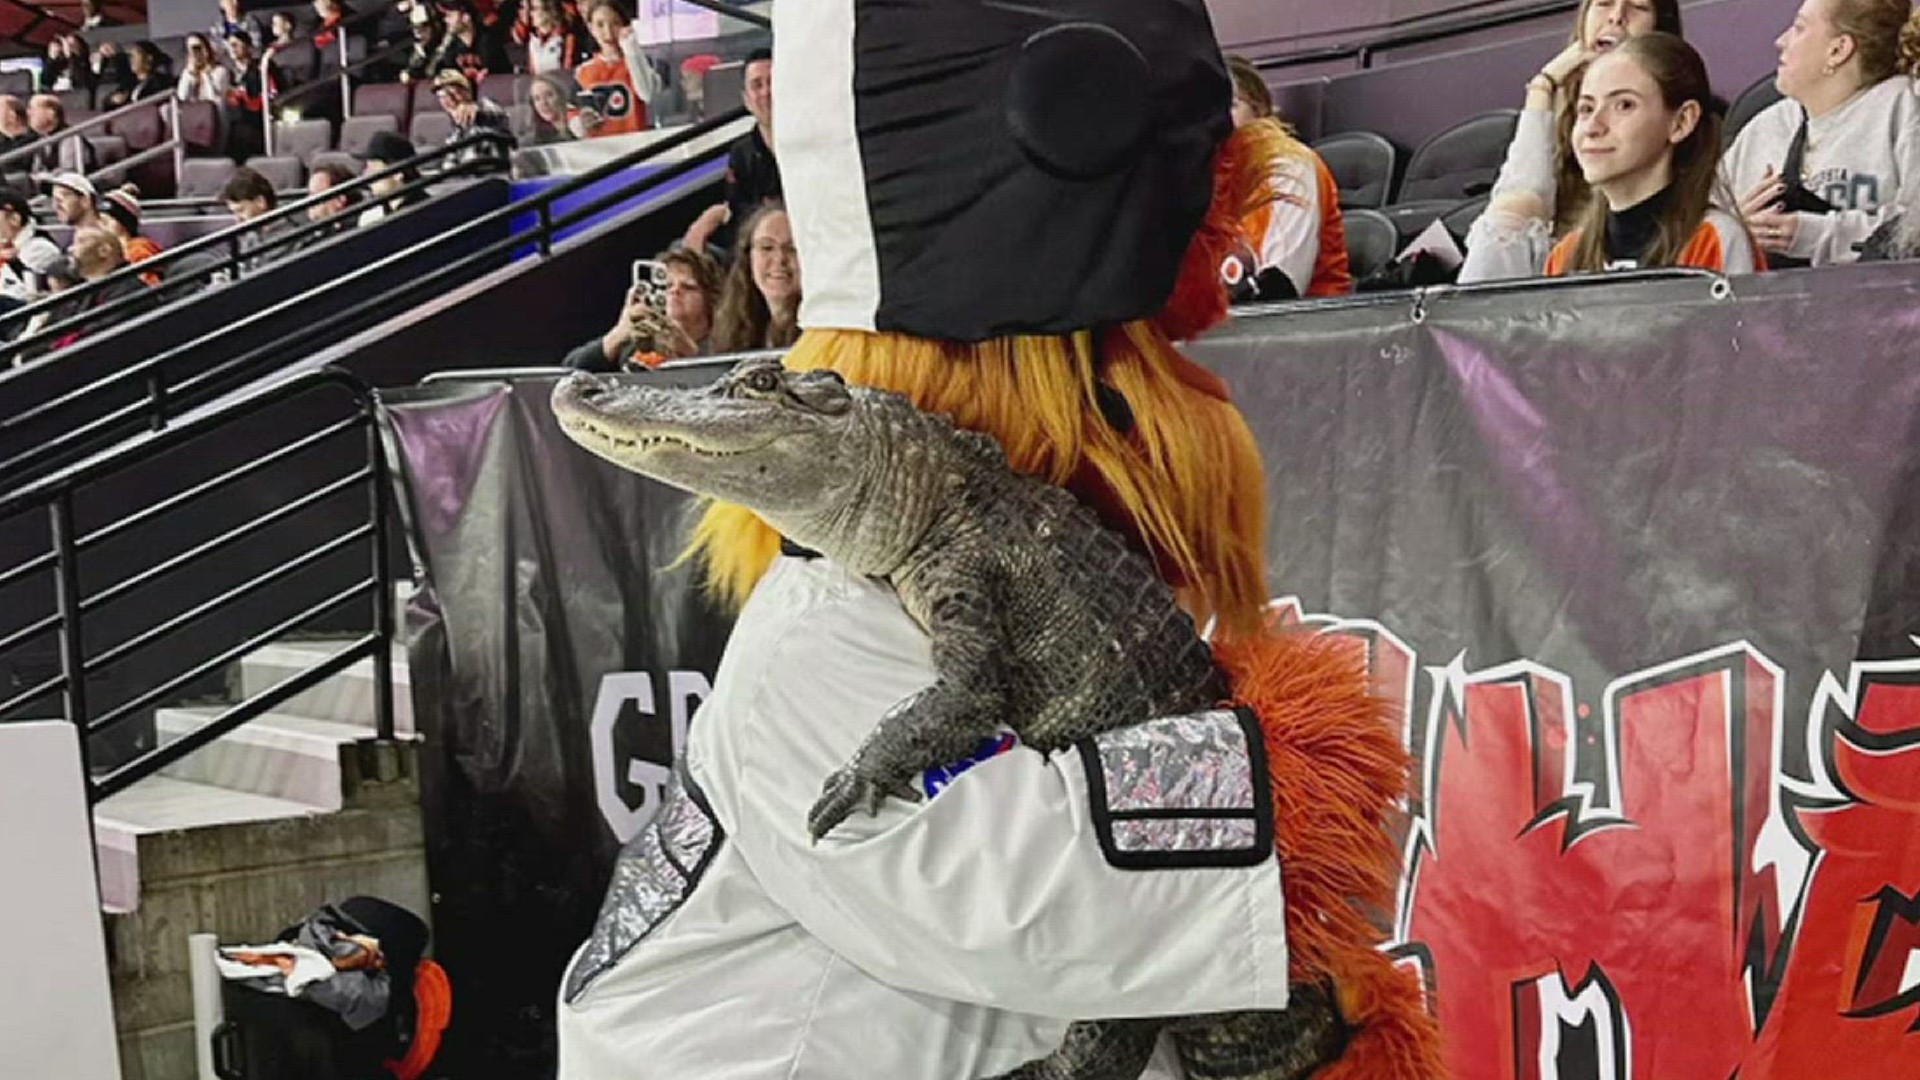 Wally the alligator was denied entrance to a Phillies game on Sept. 27, but the Flyers had no such reservations about welcoming a new scaly friend.